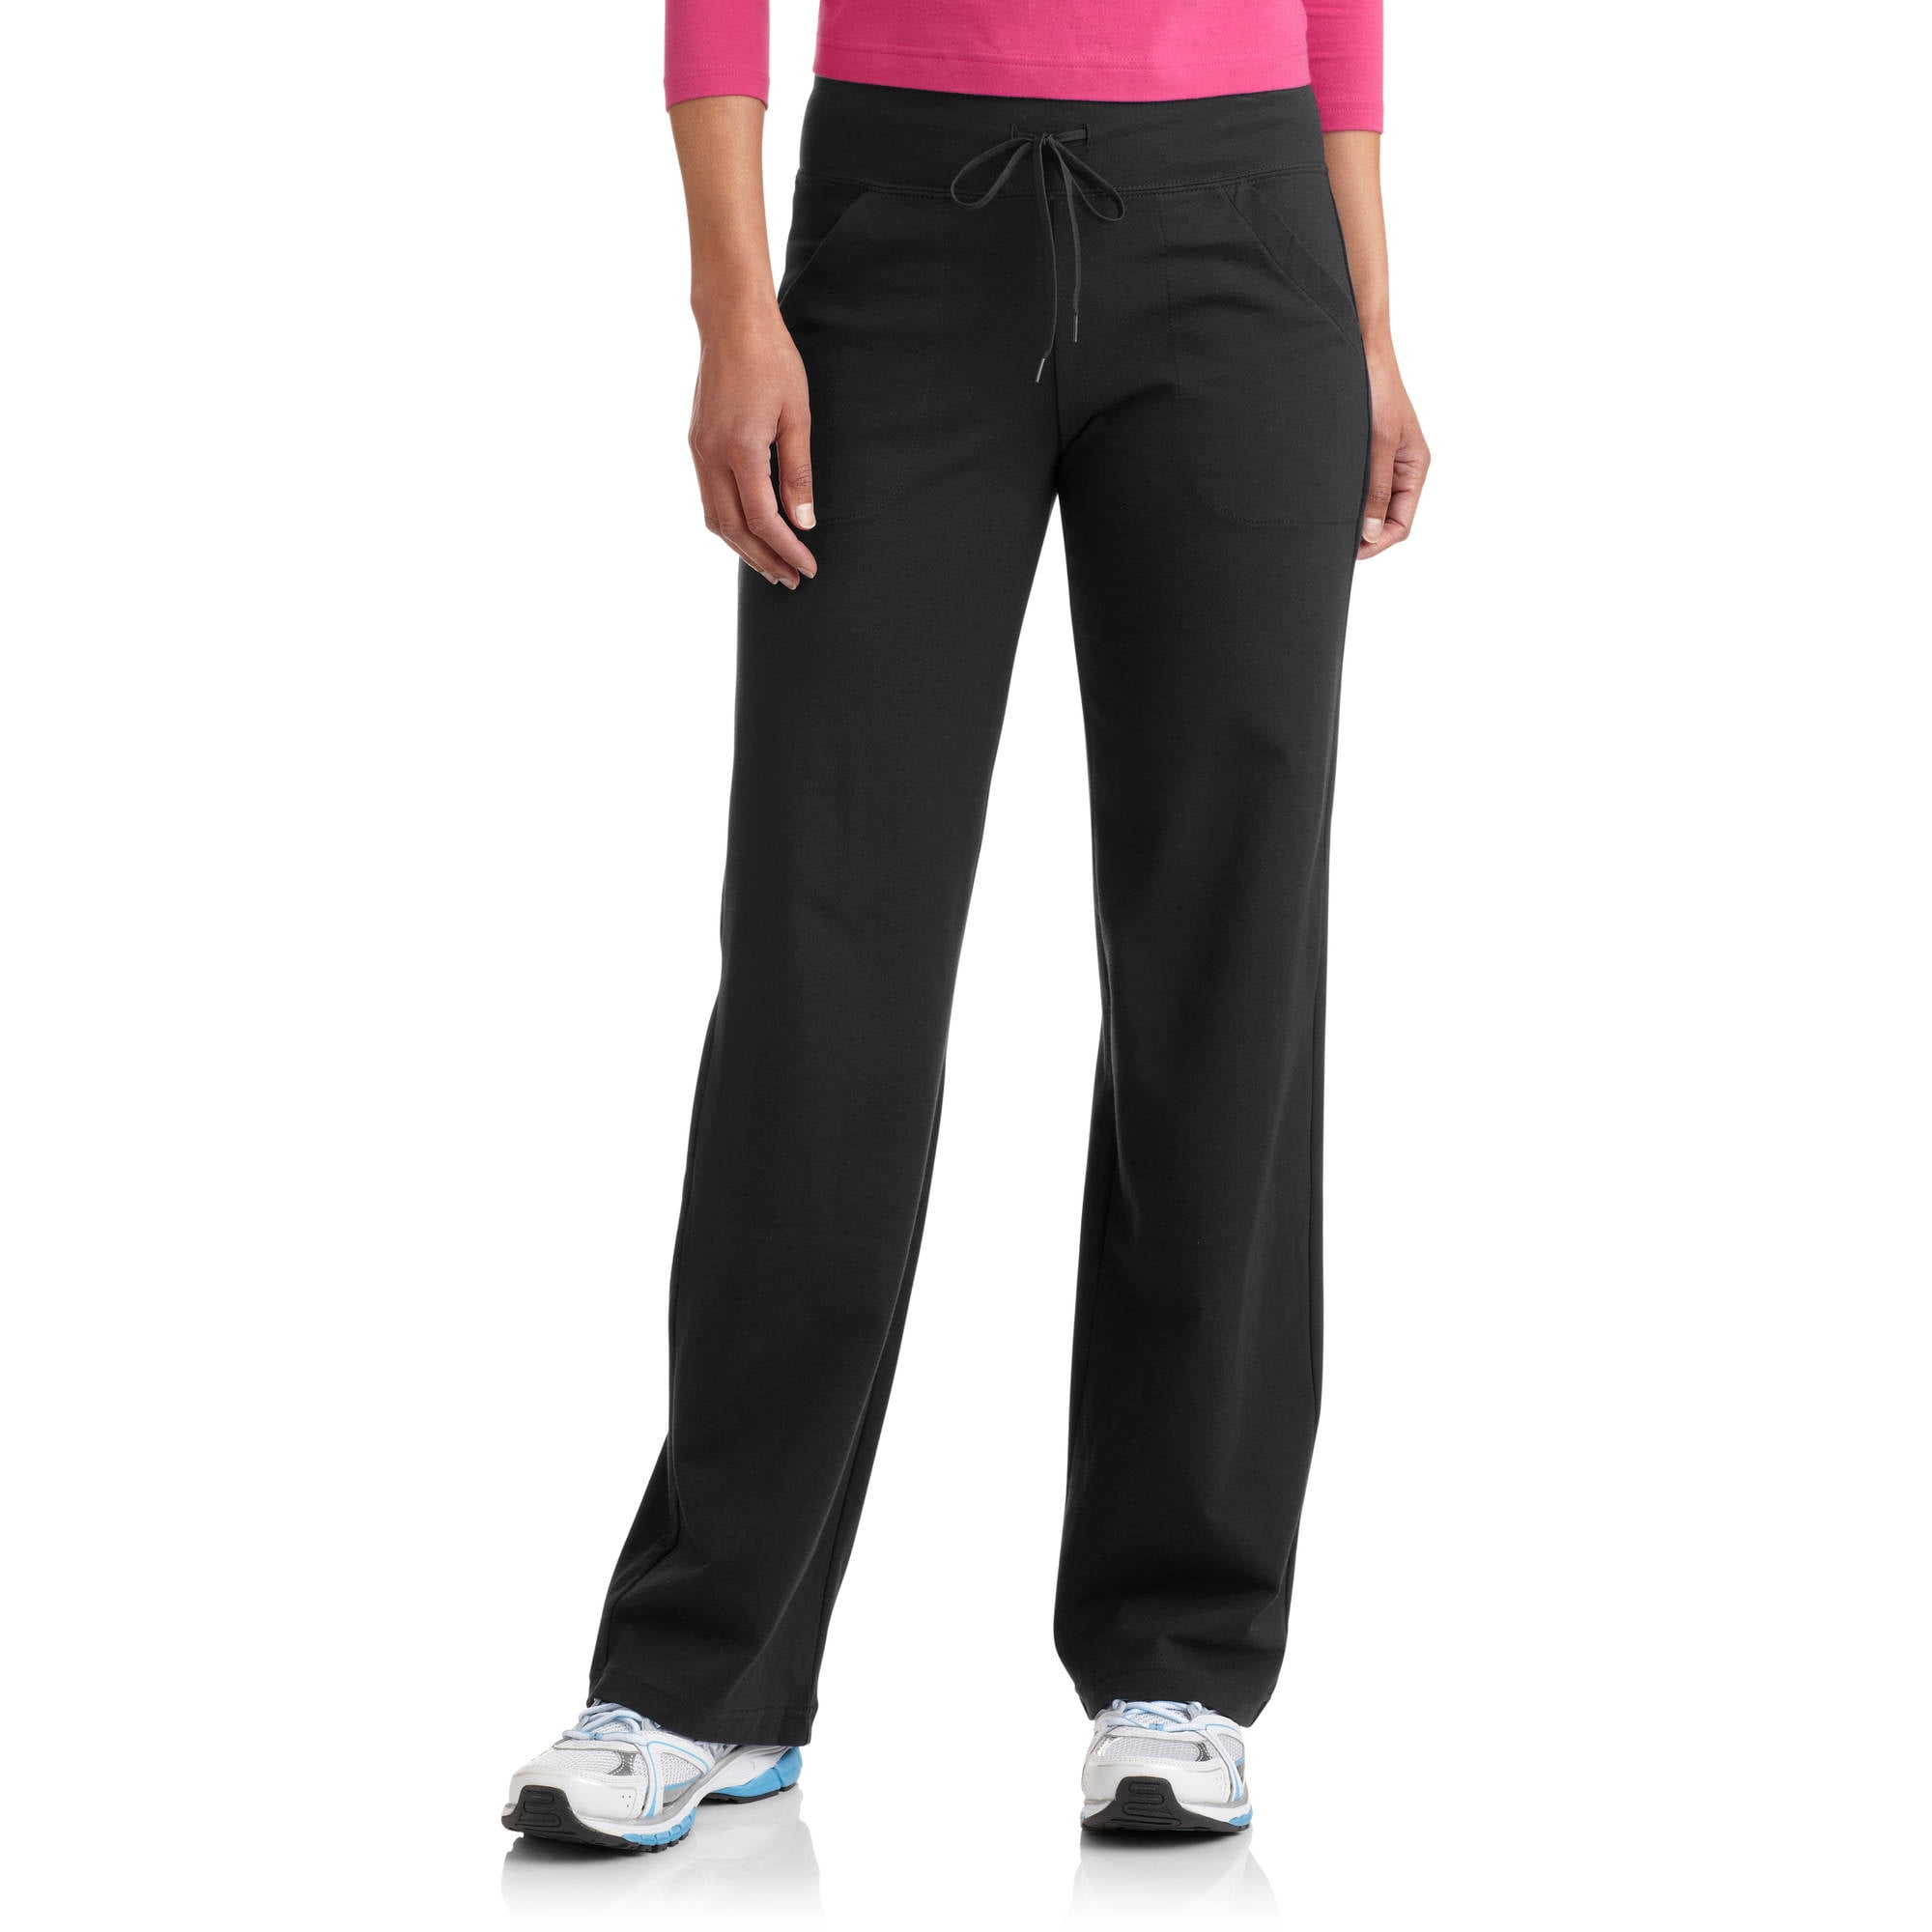 Danskin Now Women's Dri-More Core Athleisure Relaxed Fit Yoga Pants Available In Regular And Petite - image 1 of 2